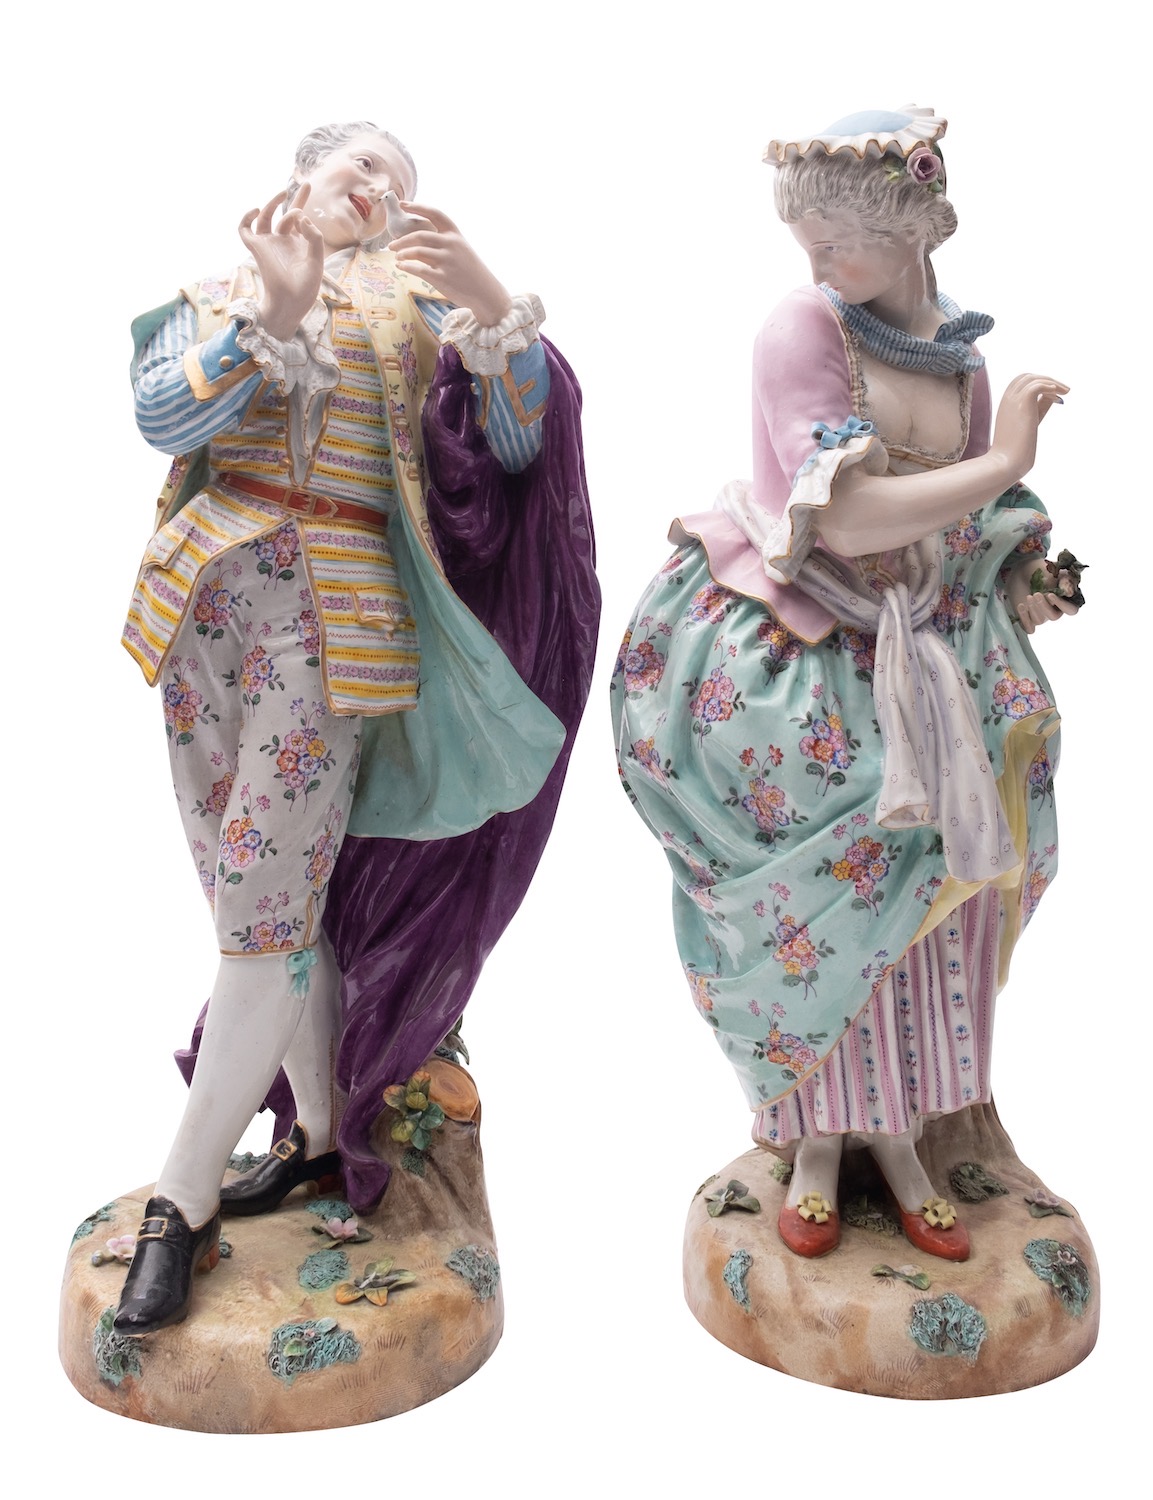 A pair of large late 19th century Continental porcelain figures of a gallant and companion wearing